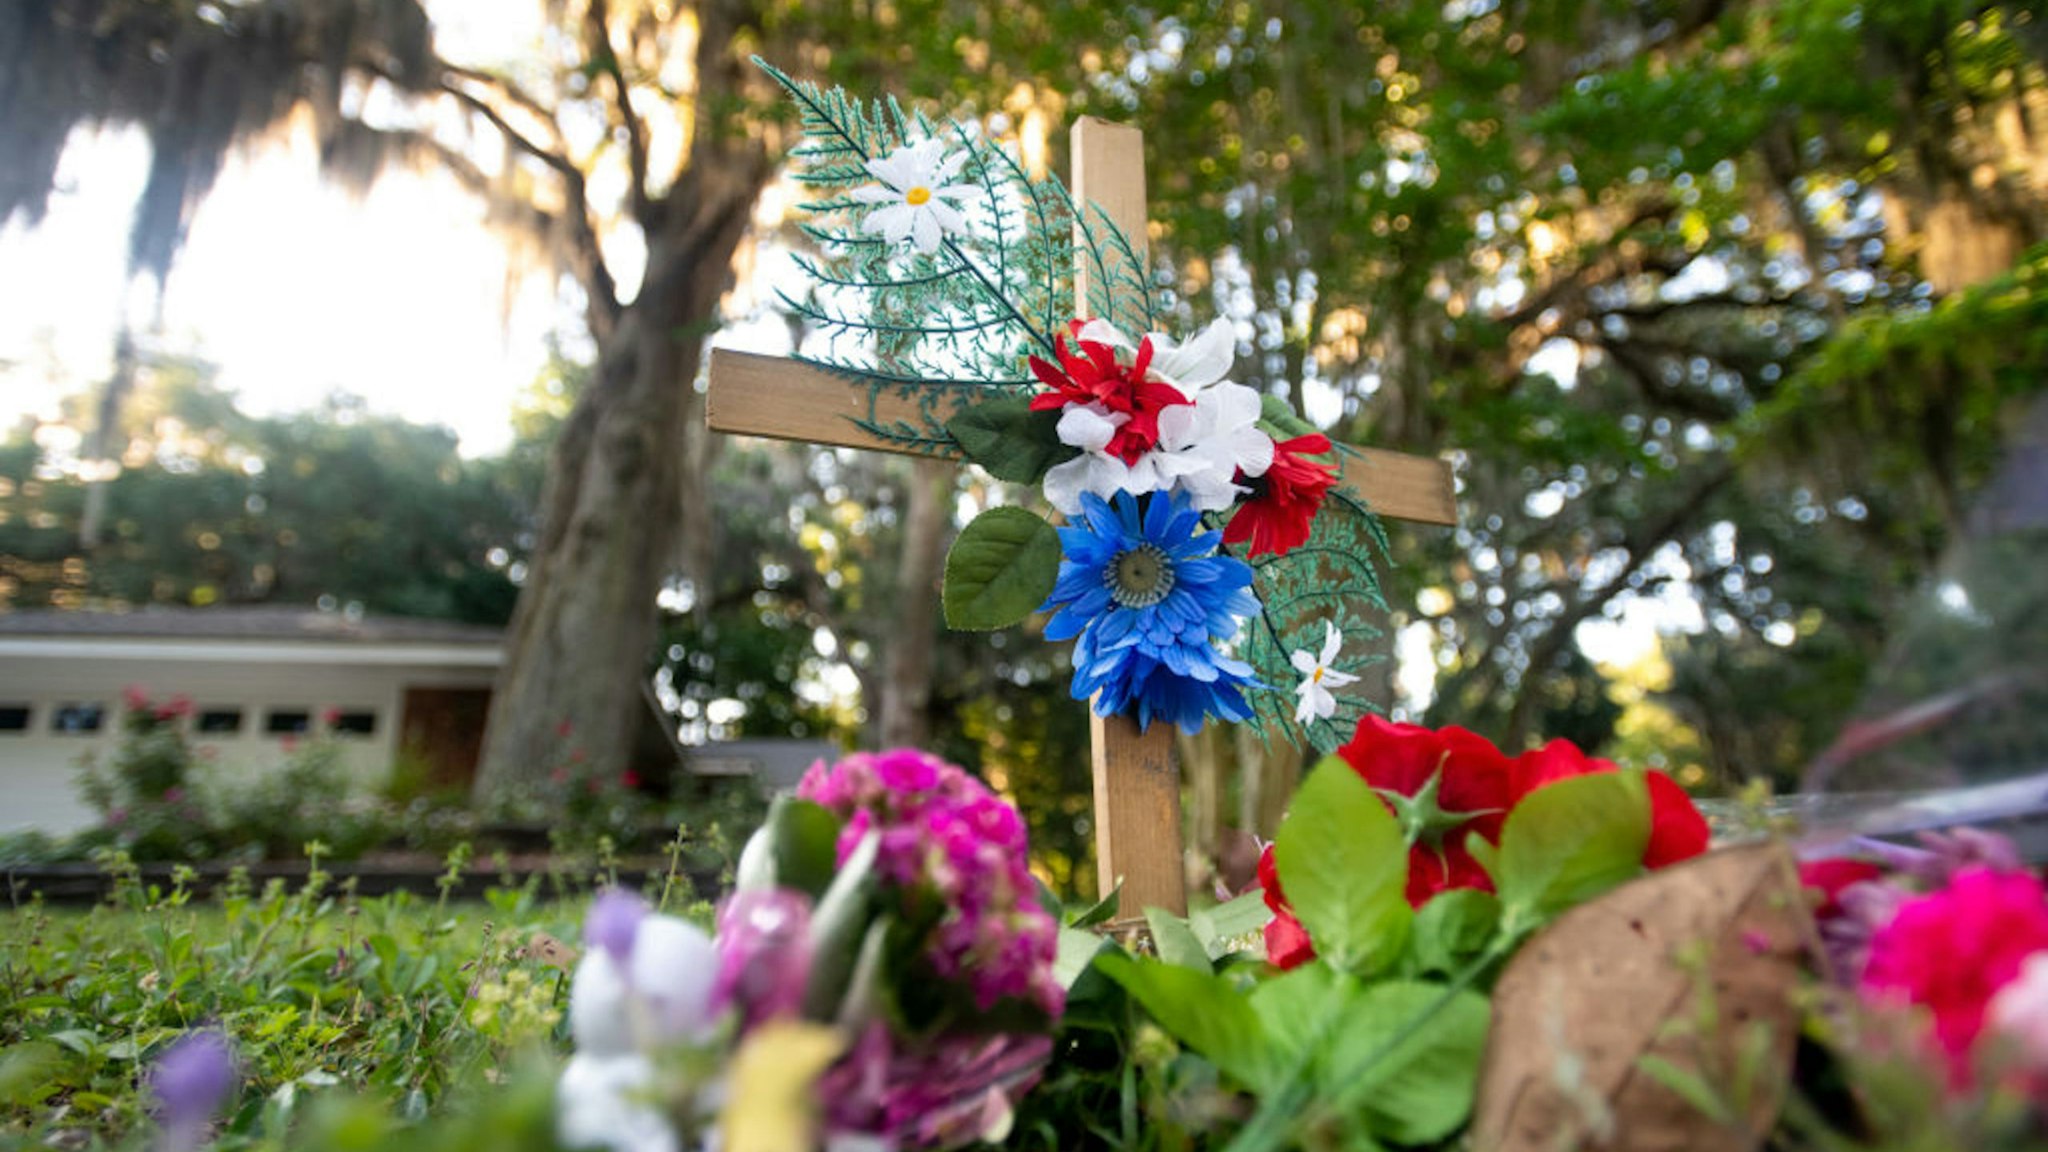 BRUNSWICK, GA - MAY 07: A cross with flowers sits near the intersection of Satilla Rd. and Holmes Rd. in the Satilla Shores neighborhood where Ahmaud Arbery was shot and killed May 7, 2020 in Brunswick, Georgia. Arbery was shot during a confrontation with an armed father and son on Feb. 23.